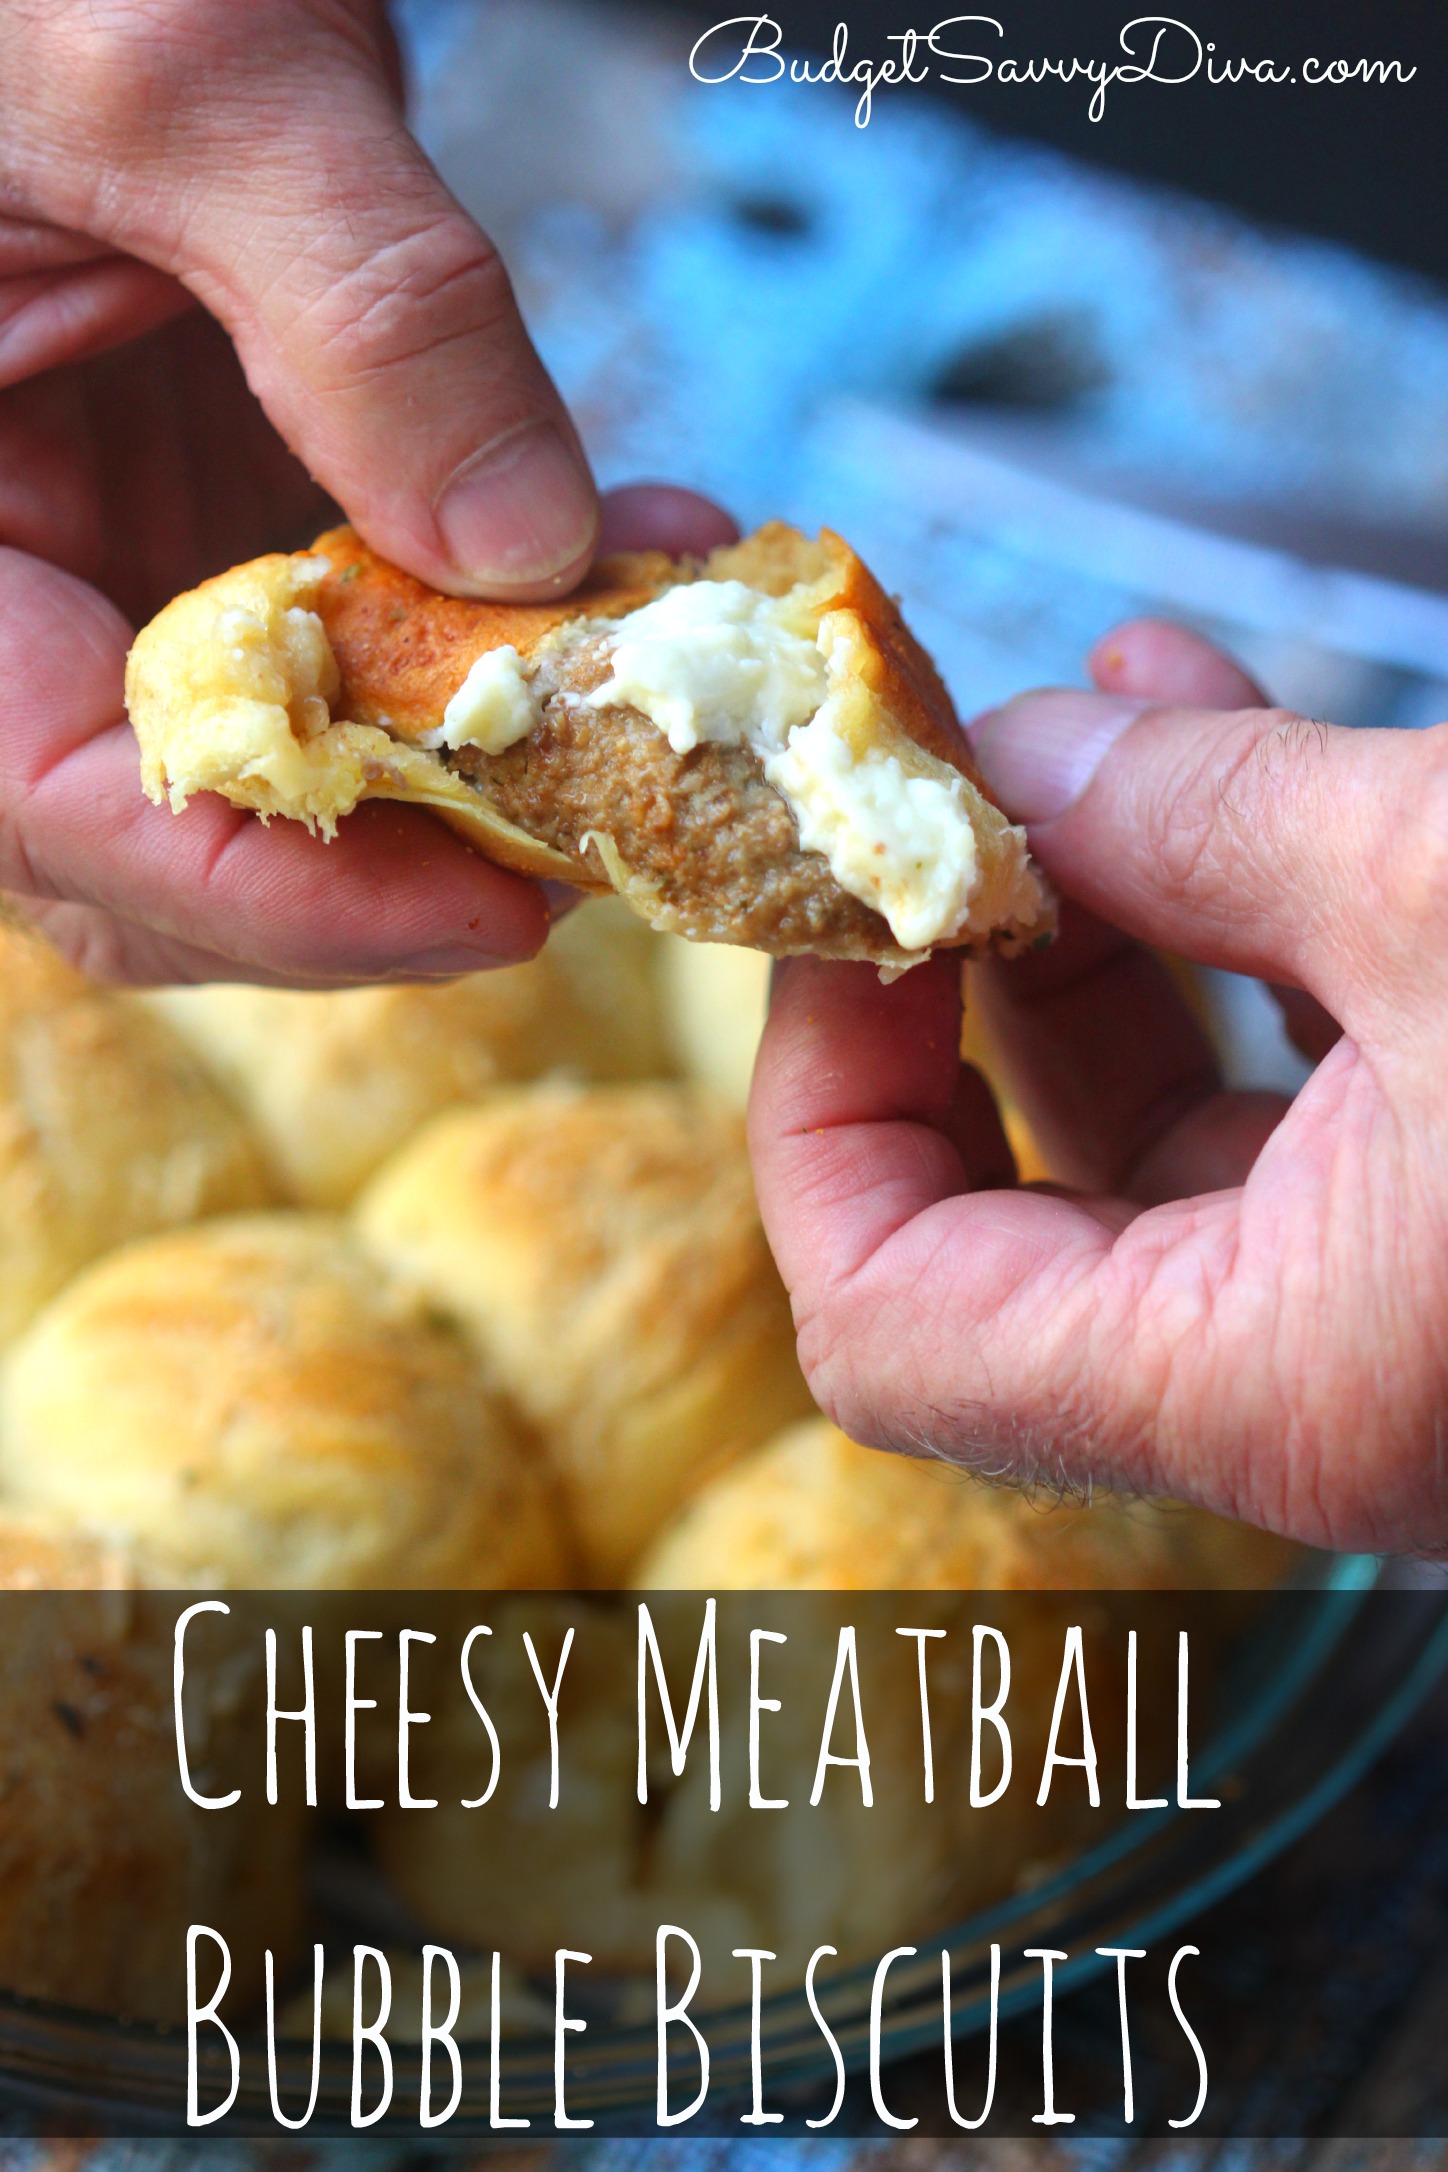 Cheesy Meatball Bubble Biscuits Recipe - Budget Savvy Diva